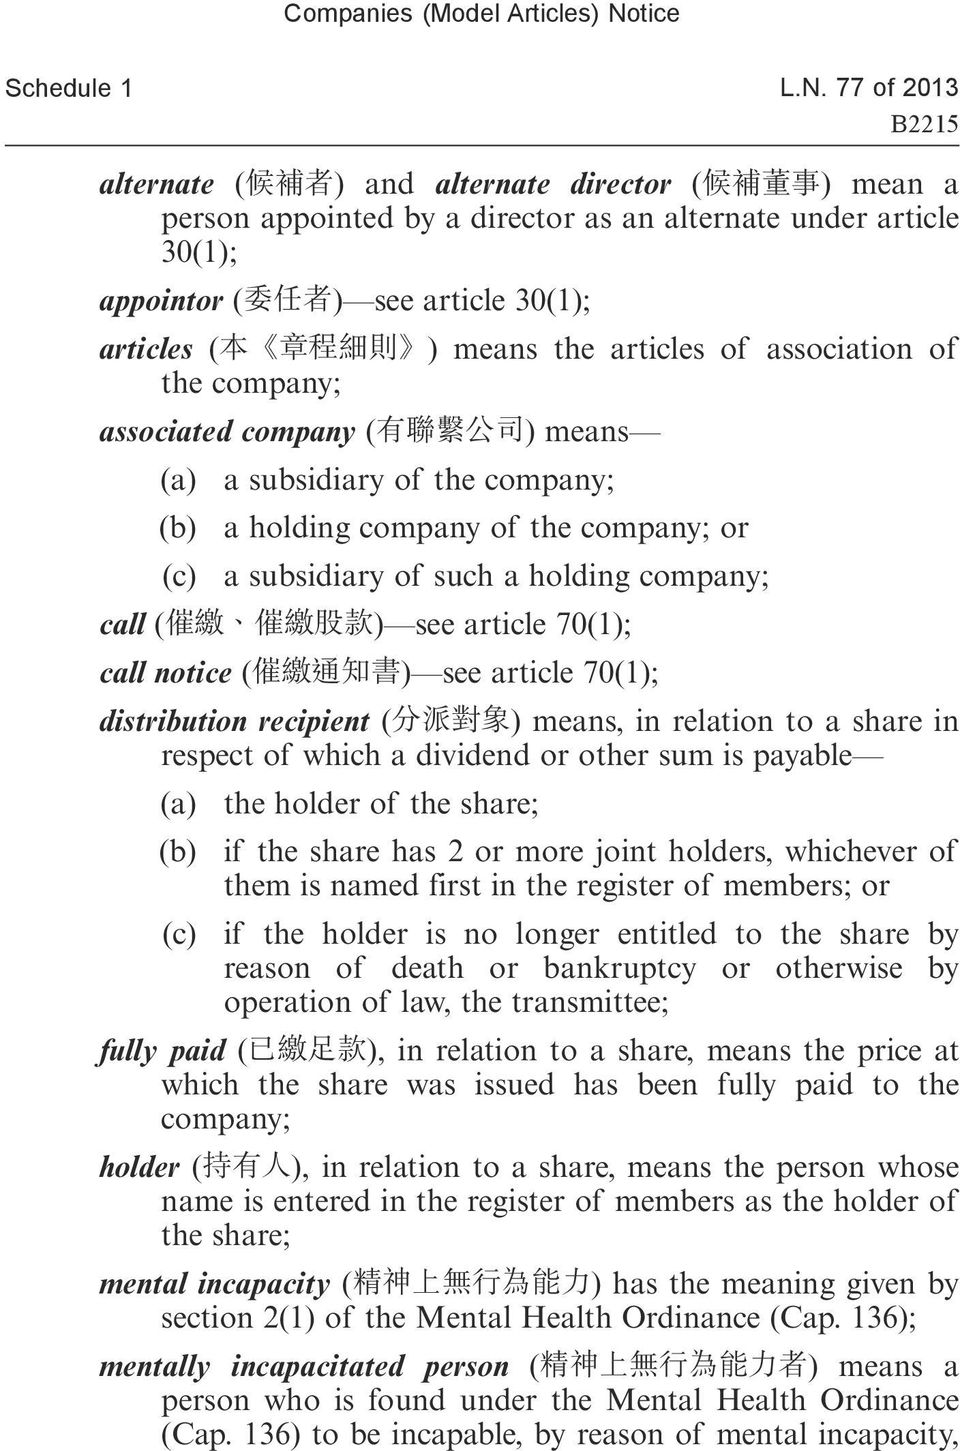 70(1); call notice ( ) see article 70(1); distribution recipient ( ) means, in relation to a share in respect of which a dividend or other sum is payable (a) the holder of the share; (b) if the share